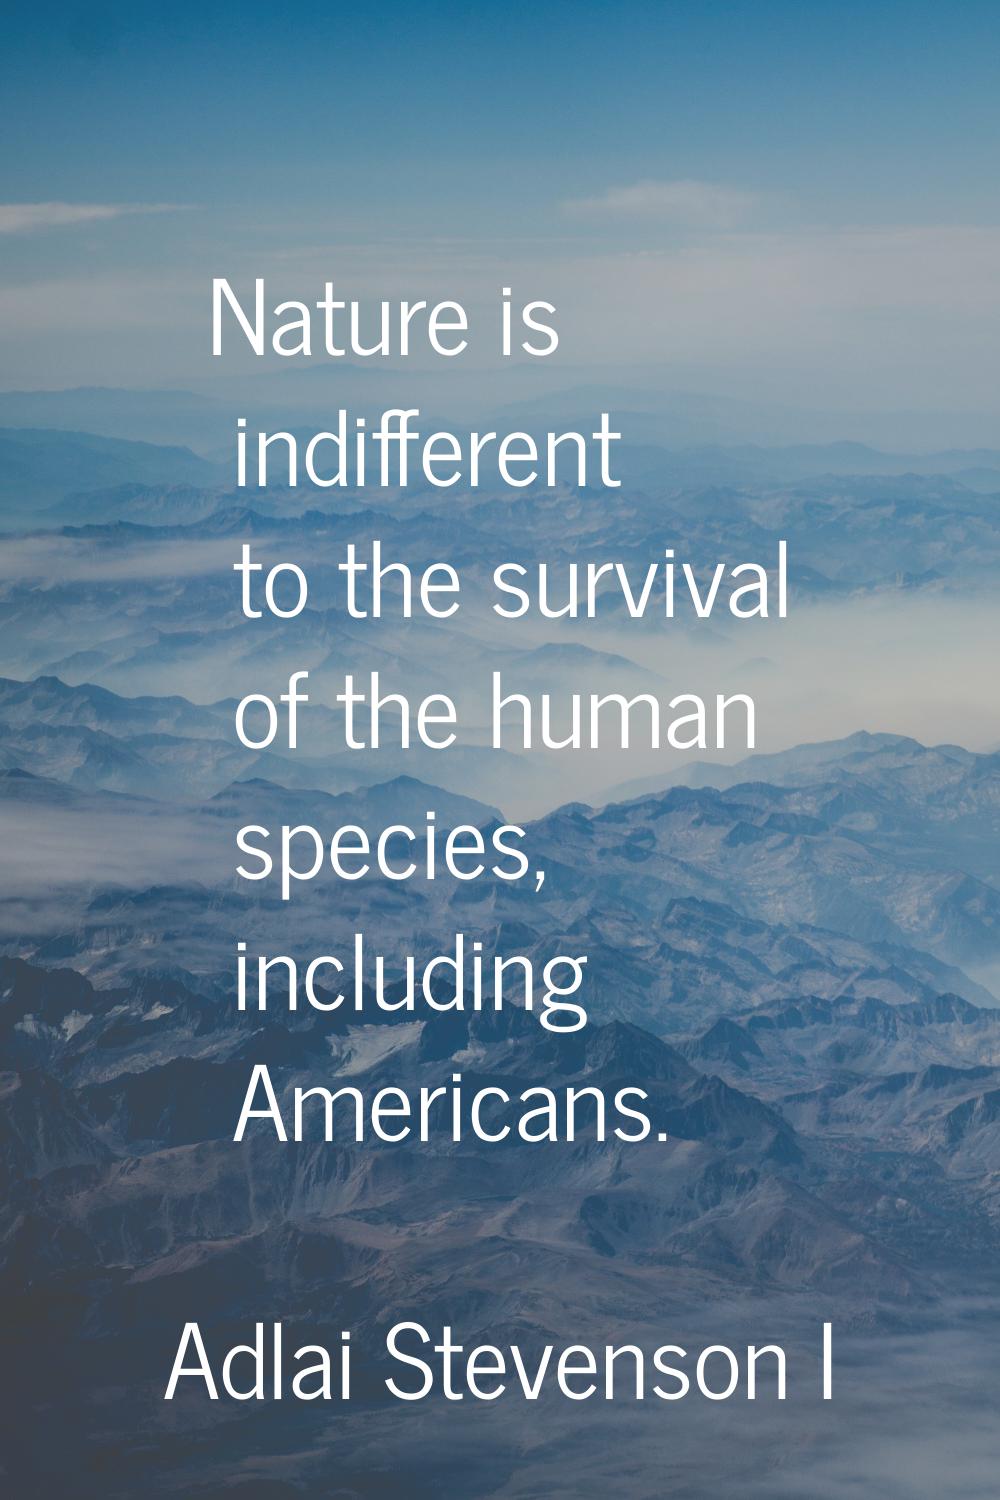 Nature is indifferent to the survival of the human species, including Americans.